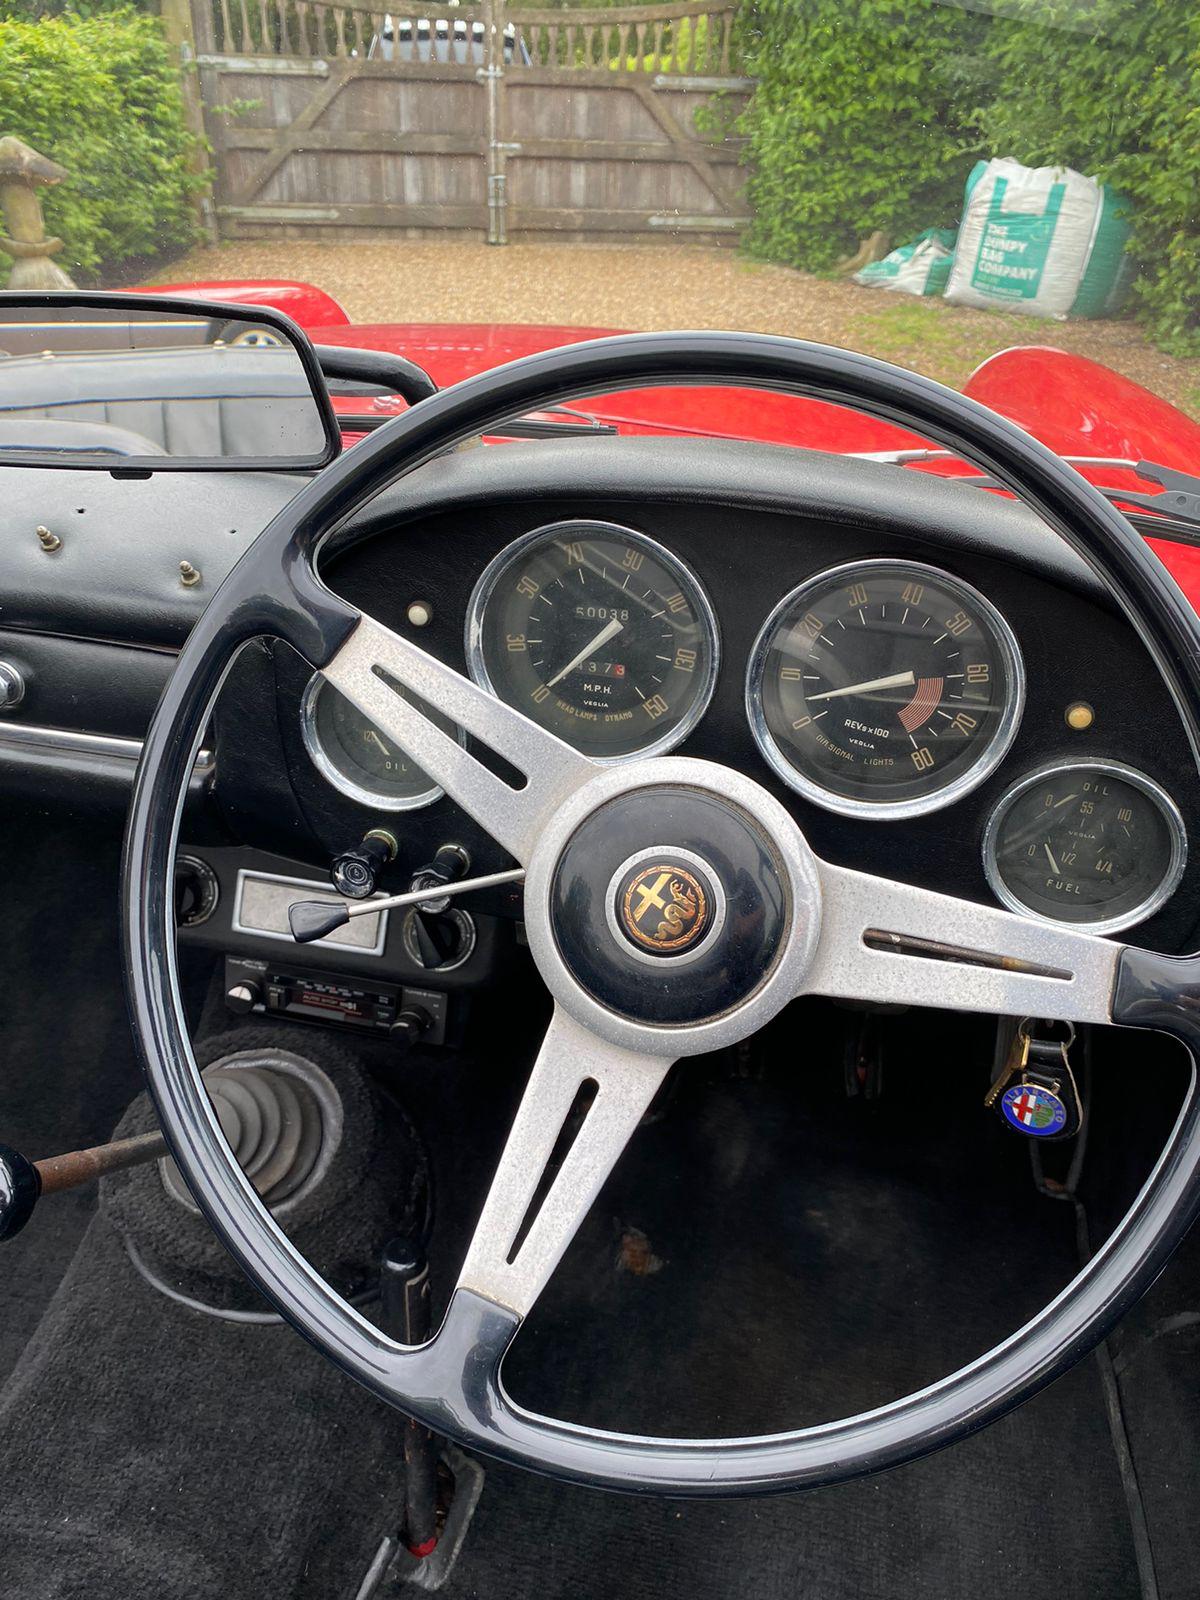 1963 Alfa Romeo 2600 Spider - First Registered 1967 - Image 16 of 25